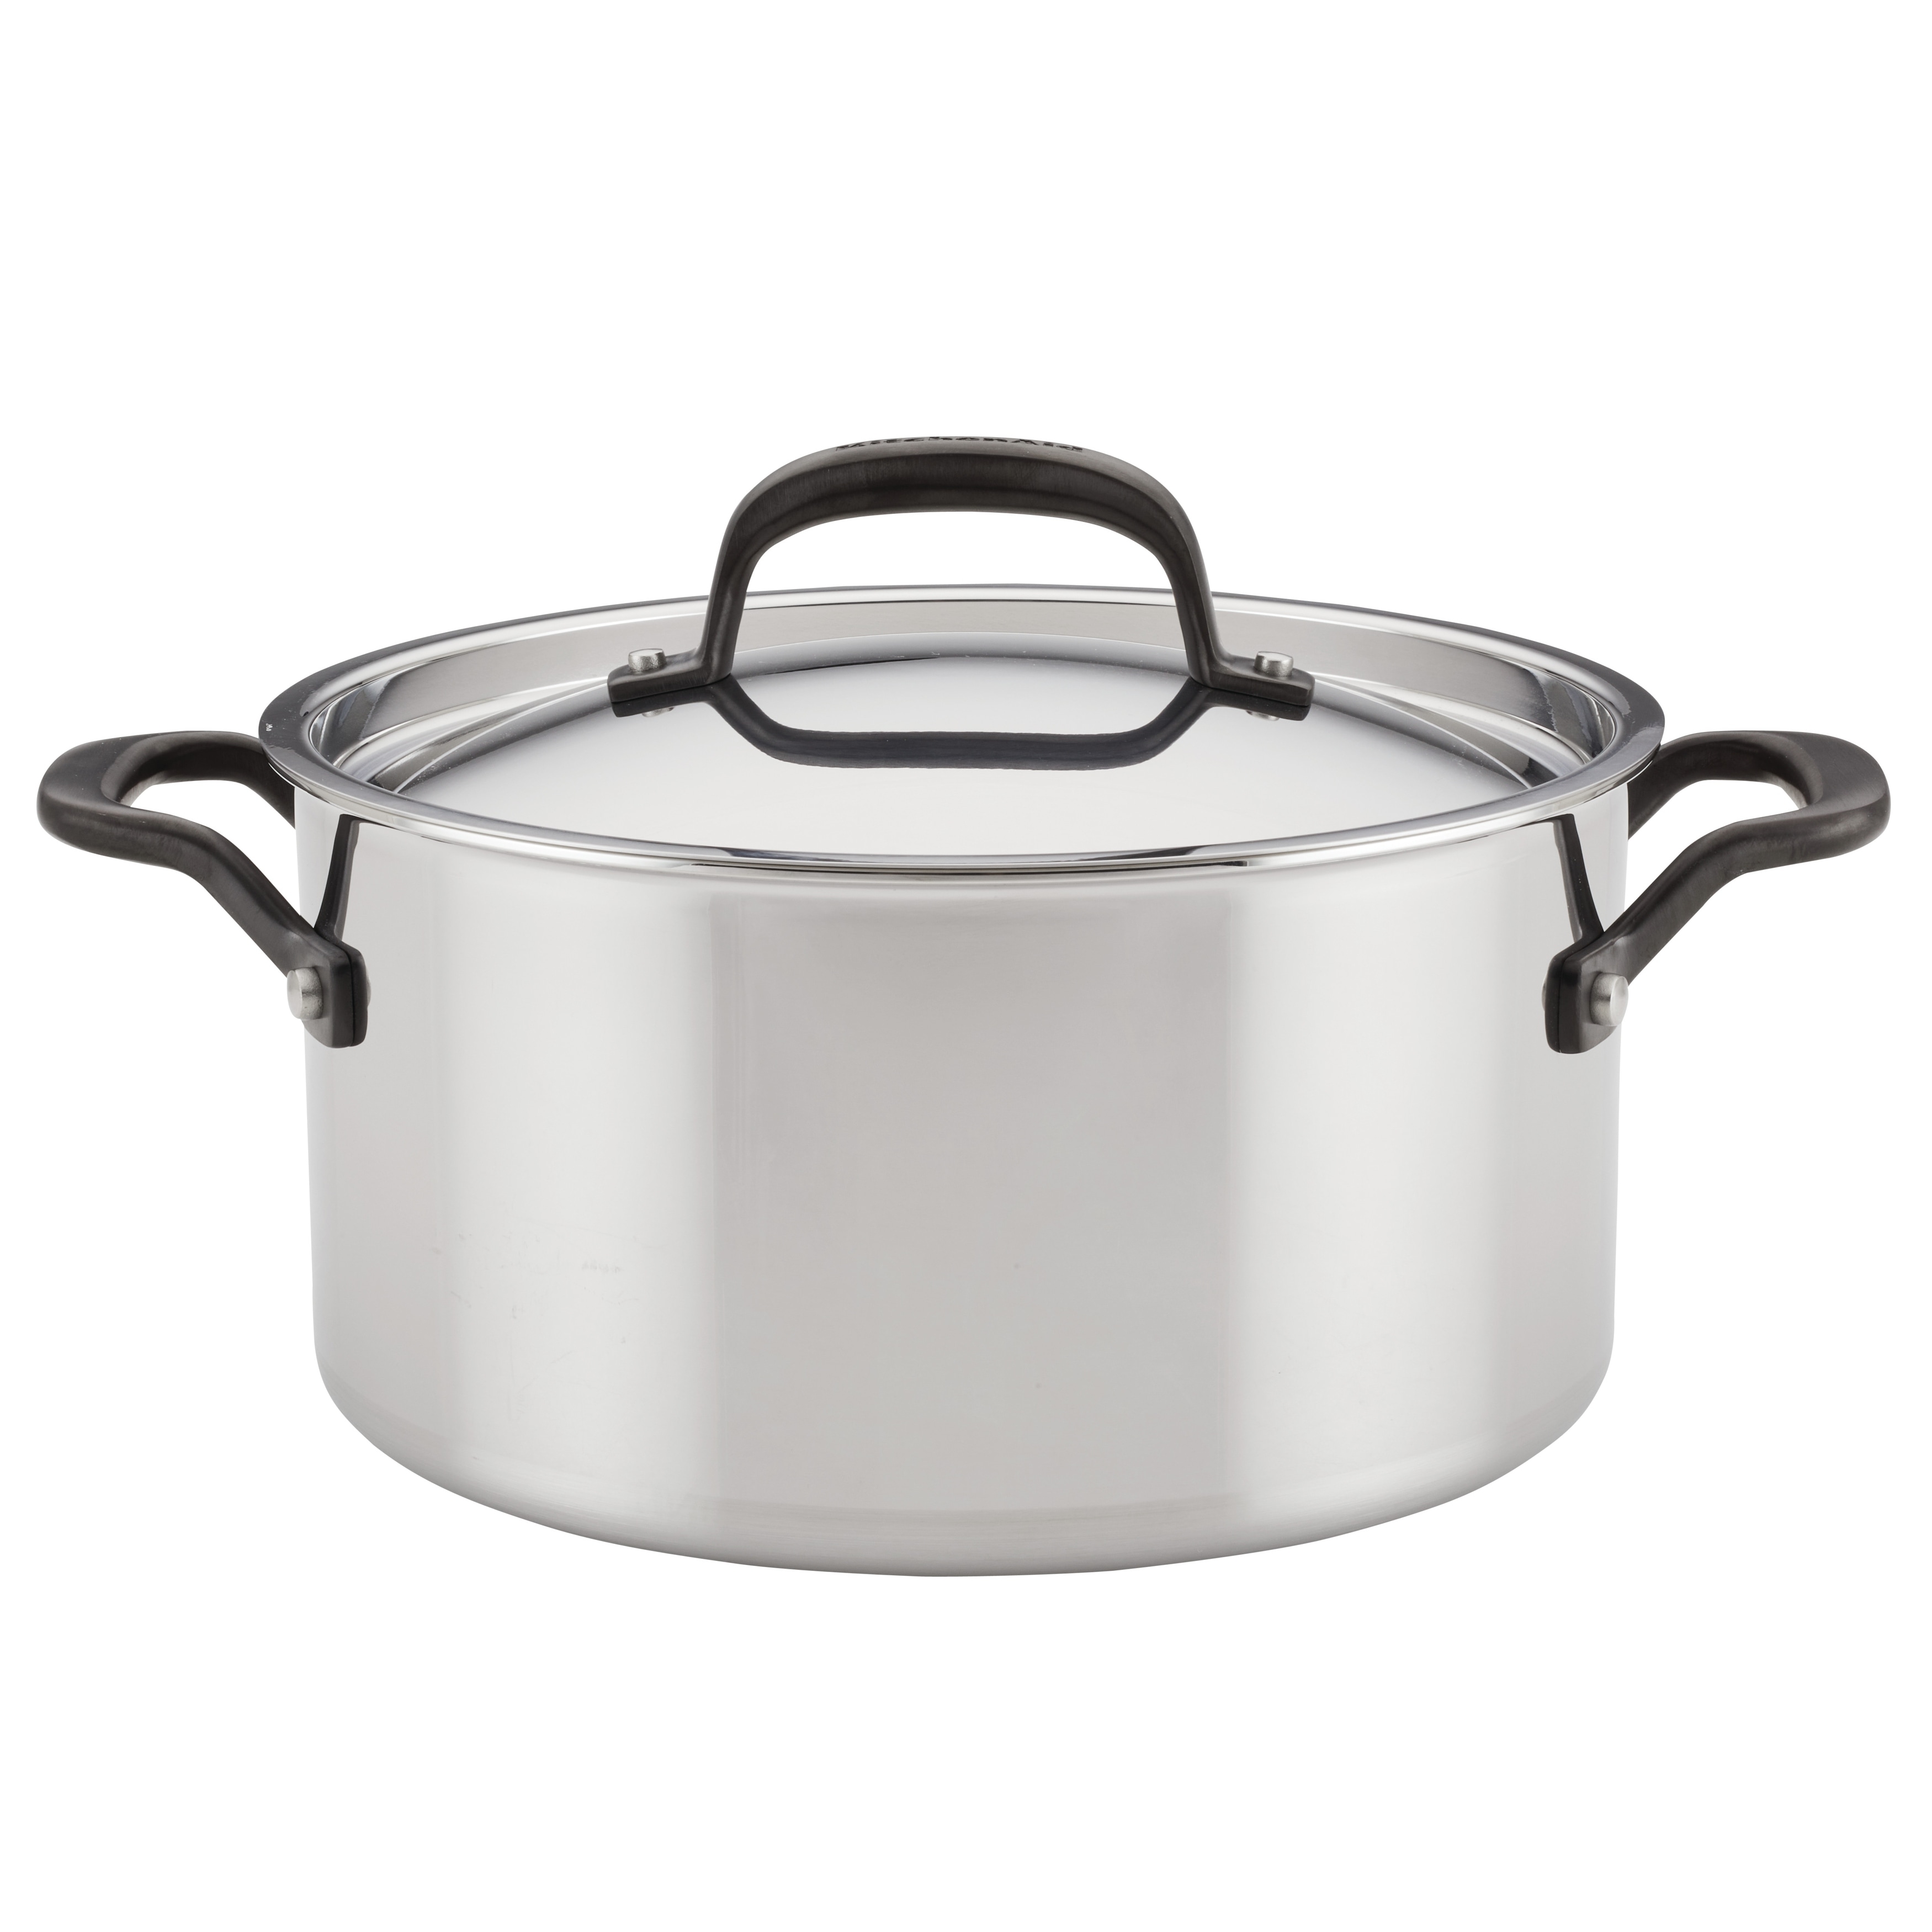 https://ak1.ostkcdn.com/images/products/is/images/direct/77e506dbbec018cb58ce4ca53d24236e54113188/KitchenAid-5-Ply-Clad-Stainless-Steel-Induction-Stockpot-with-Lid%2C-6-Quart%2C-Polished-Stainless-Steel.jpg